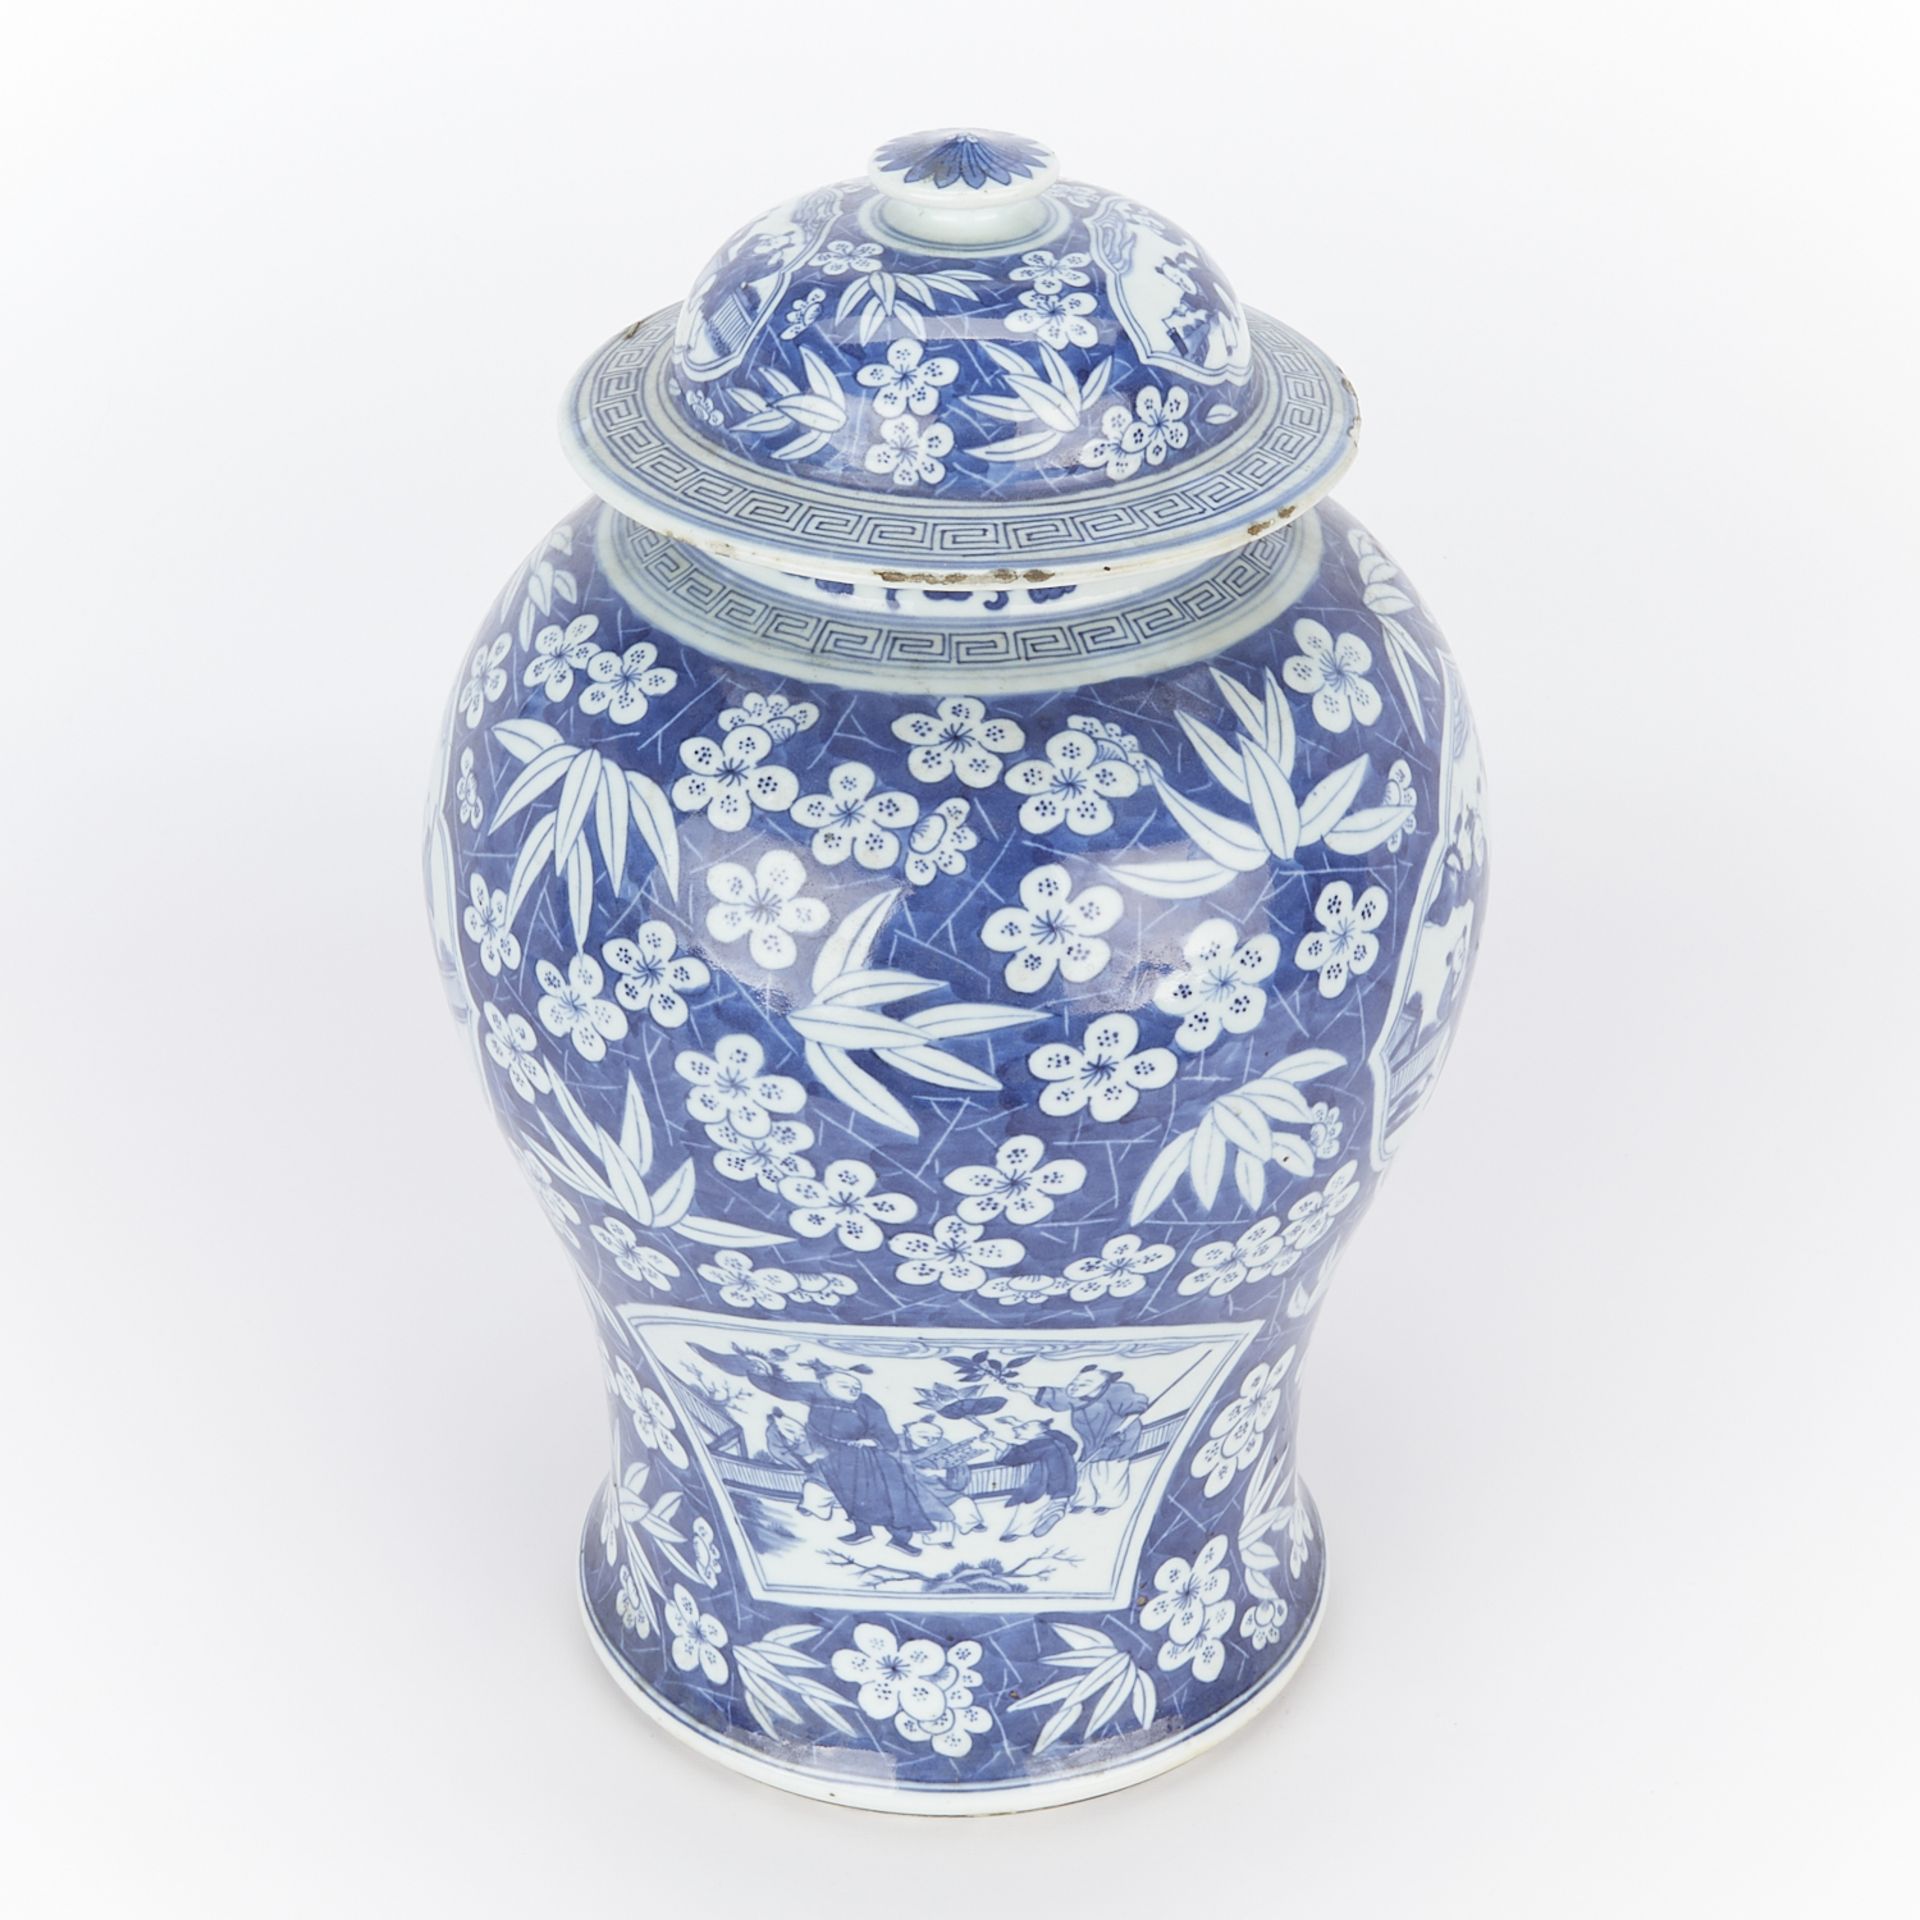 18th/19th c. Chinese B&W Porcelain Baluster Vase - Image 7 of 15